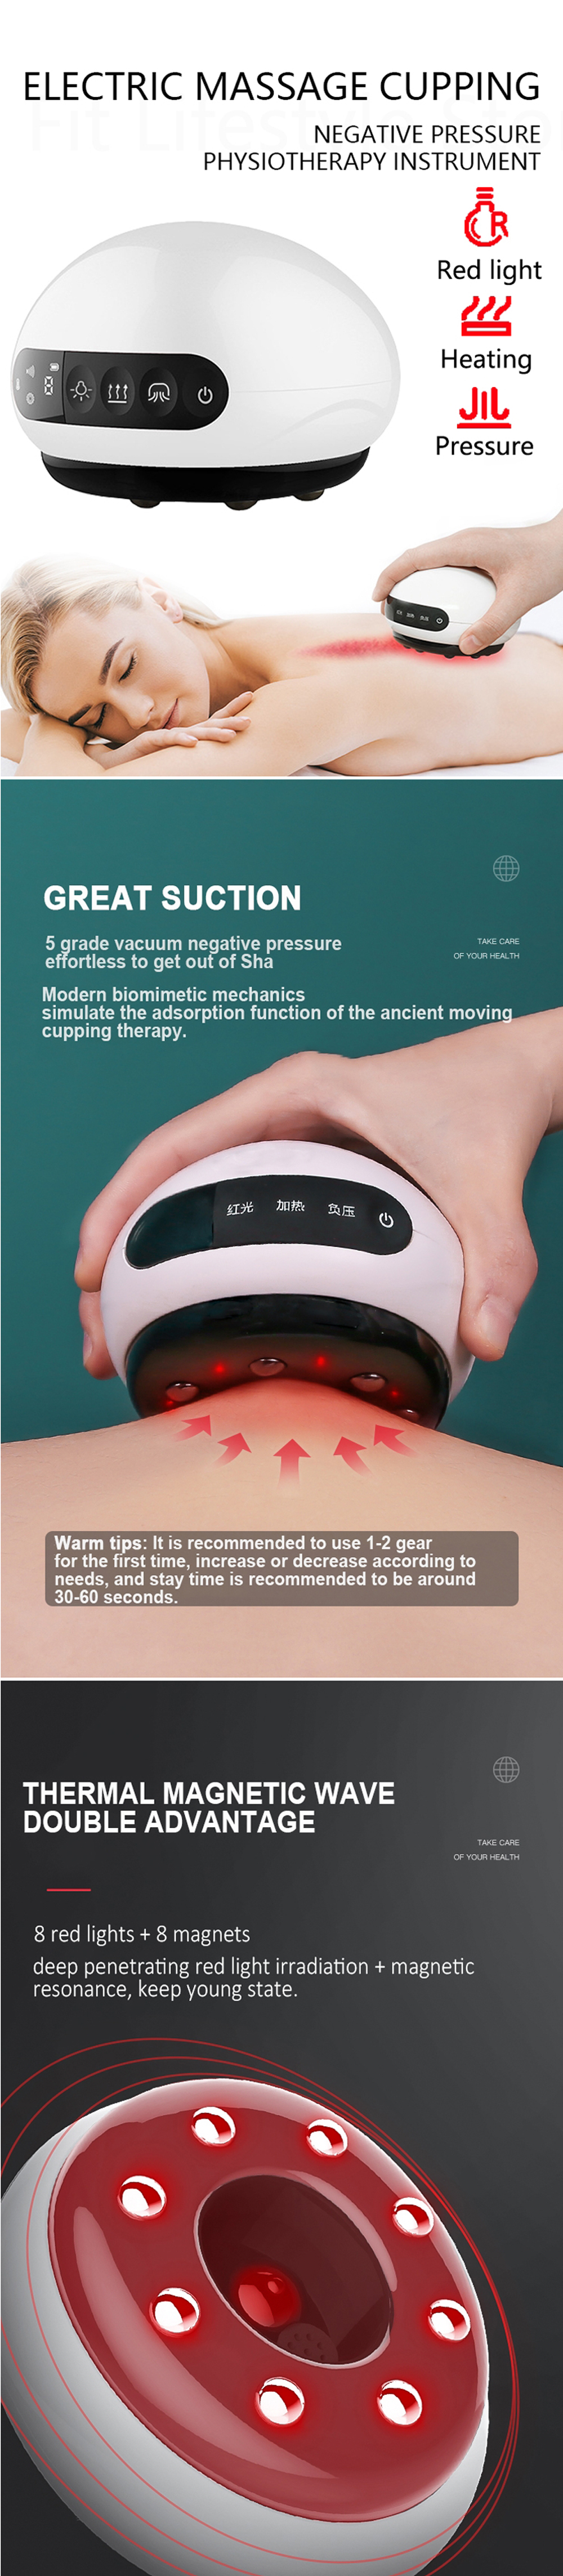 Electric-Cupping-Massager-LCD-Display-Guasha-Scraping-EMS-Body-Massage-Vacuum-Cans-Suction-Cup-IR-He-1925143-1